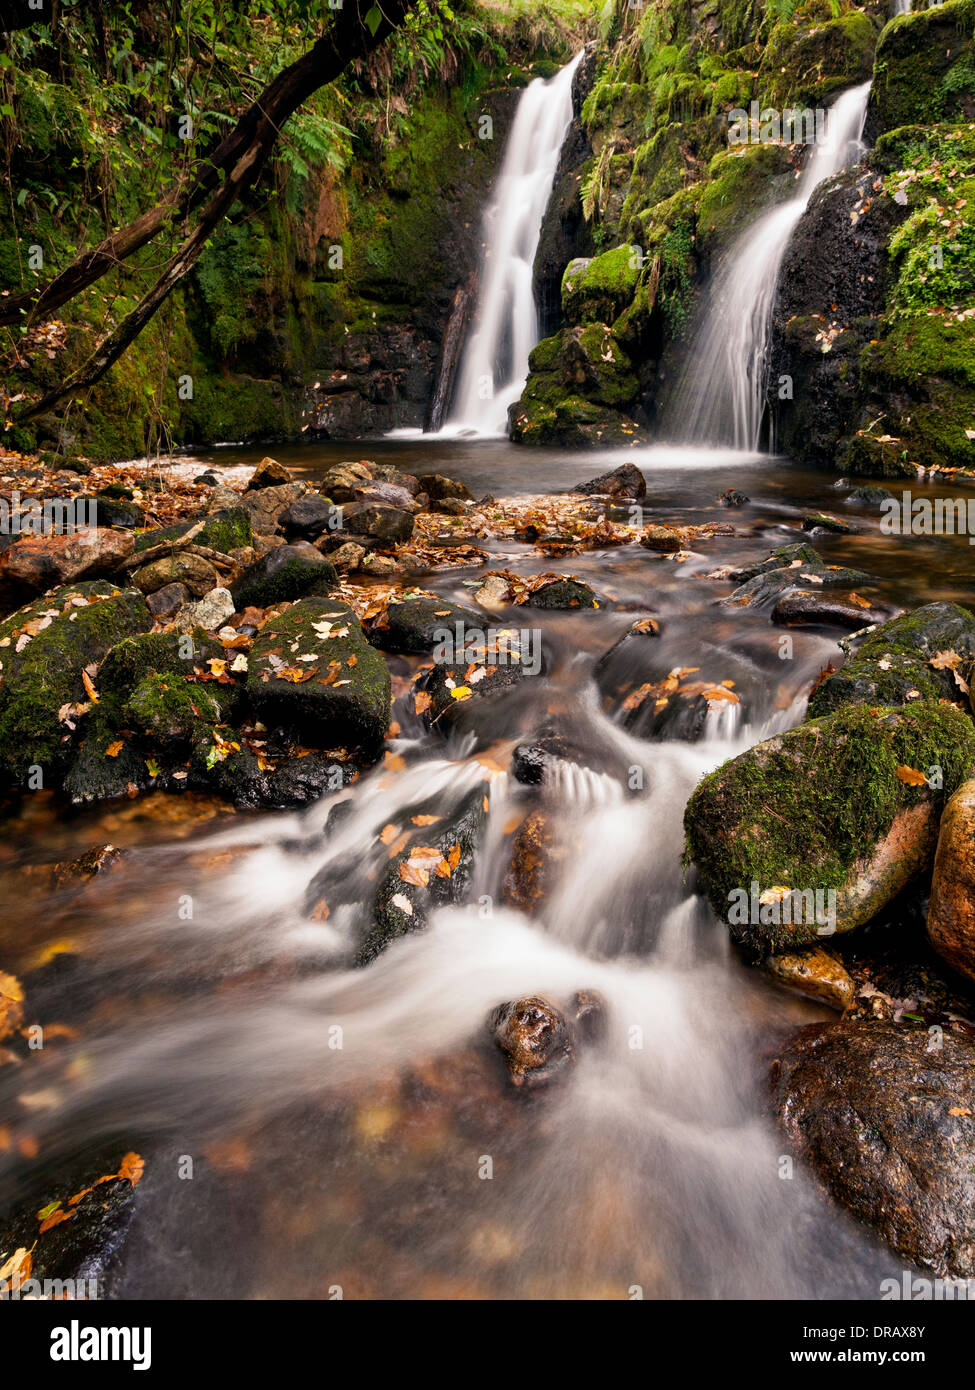 The twin falls at Venford brook and the outflow from the pool at the foot of the falls. Stock Photo